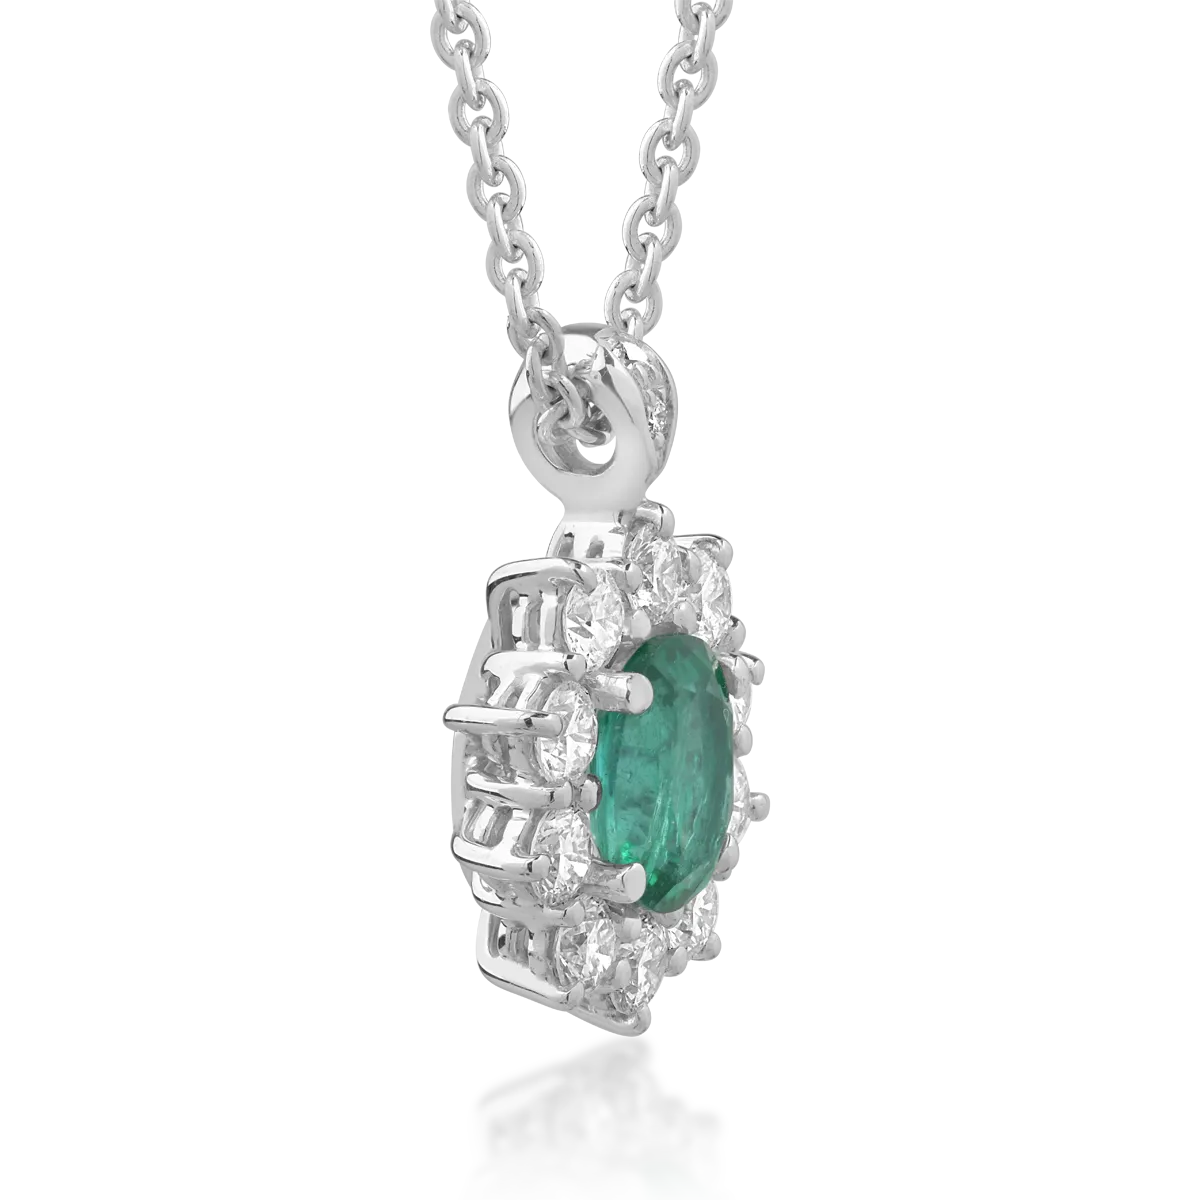 18K white gold pendant necklace with 0.5ct emerald and 0.45ct diamonds